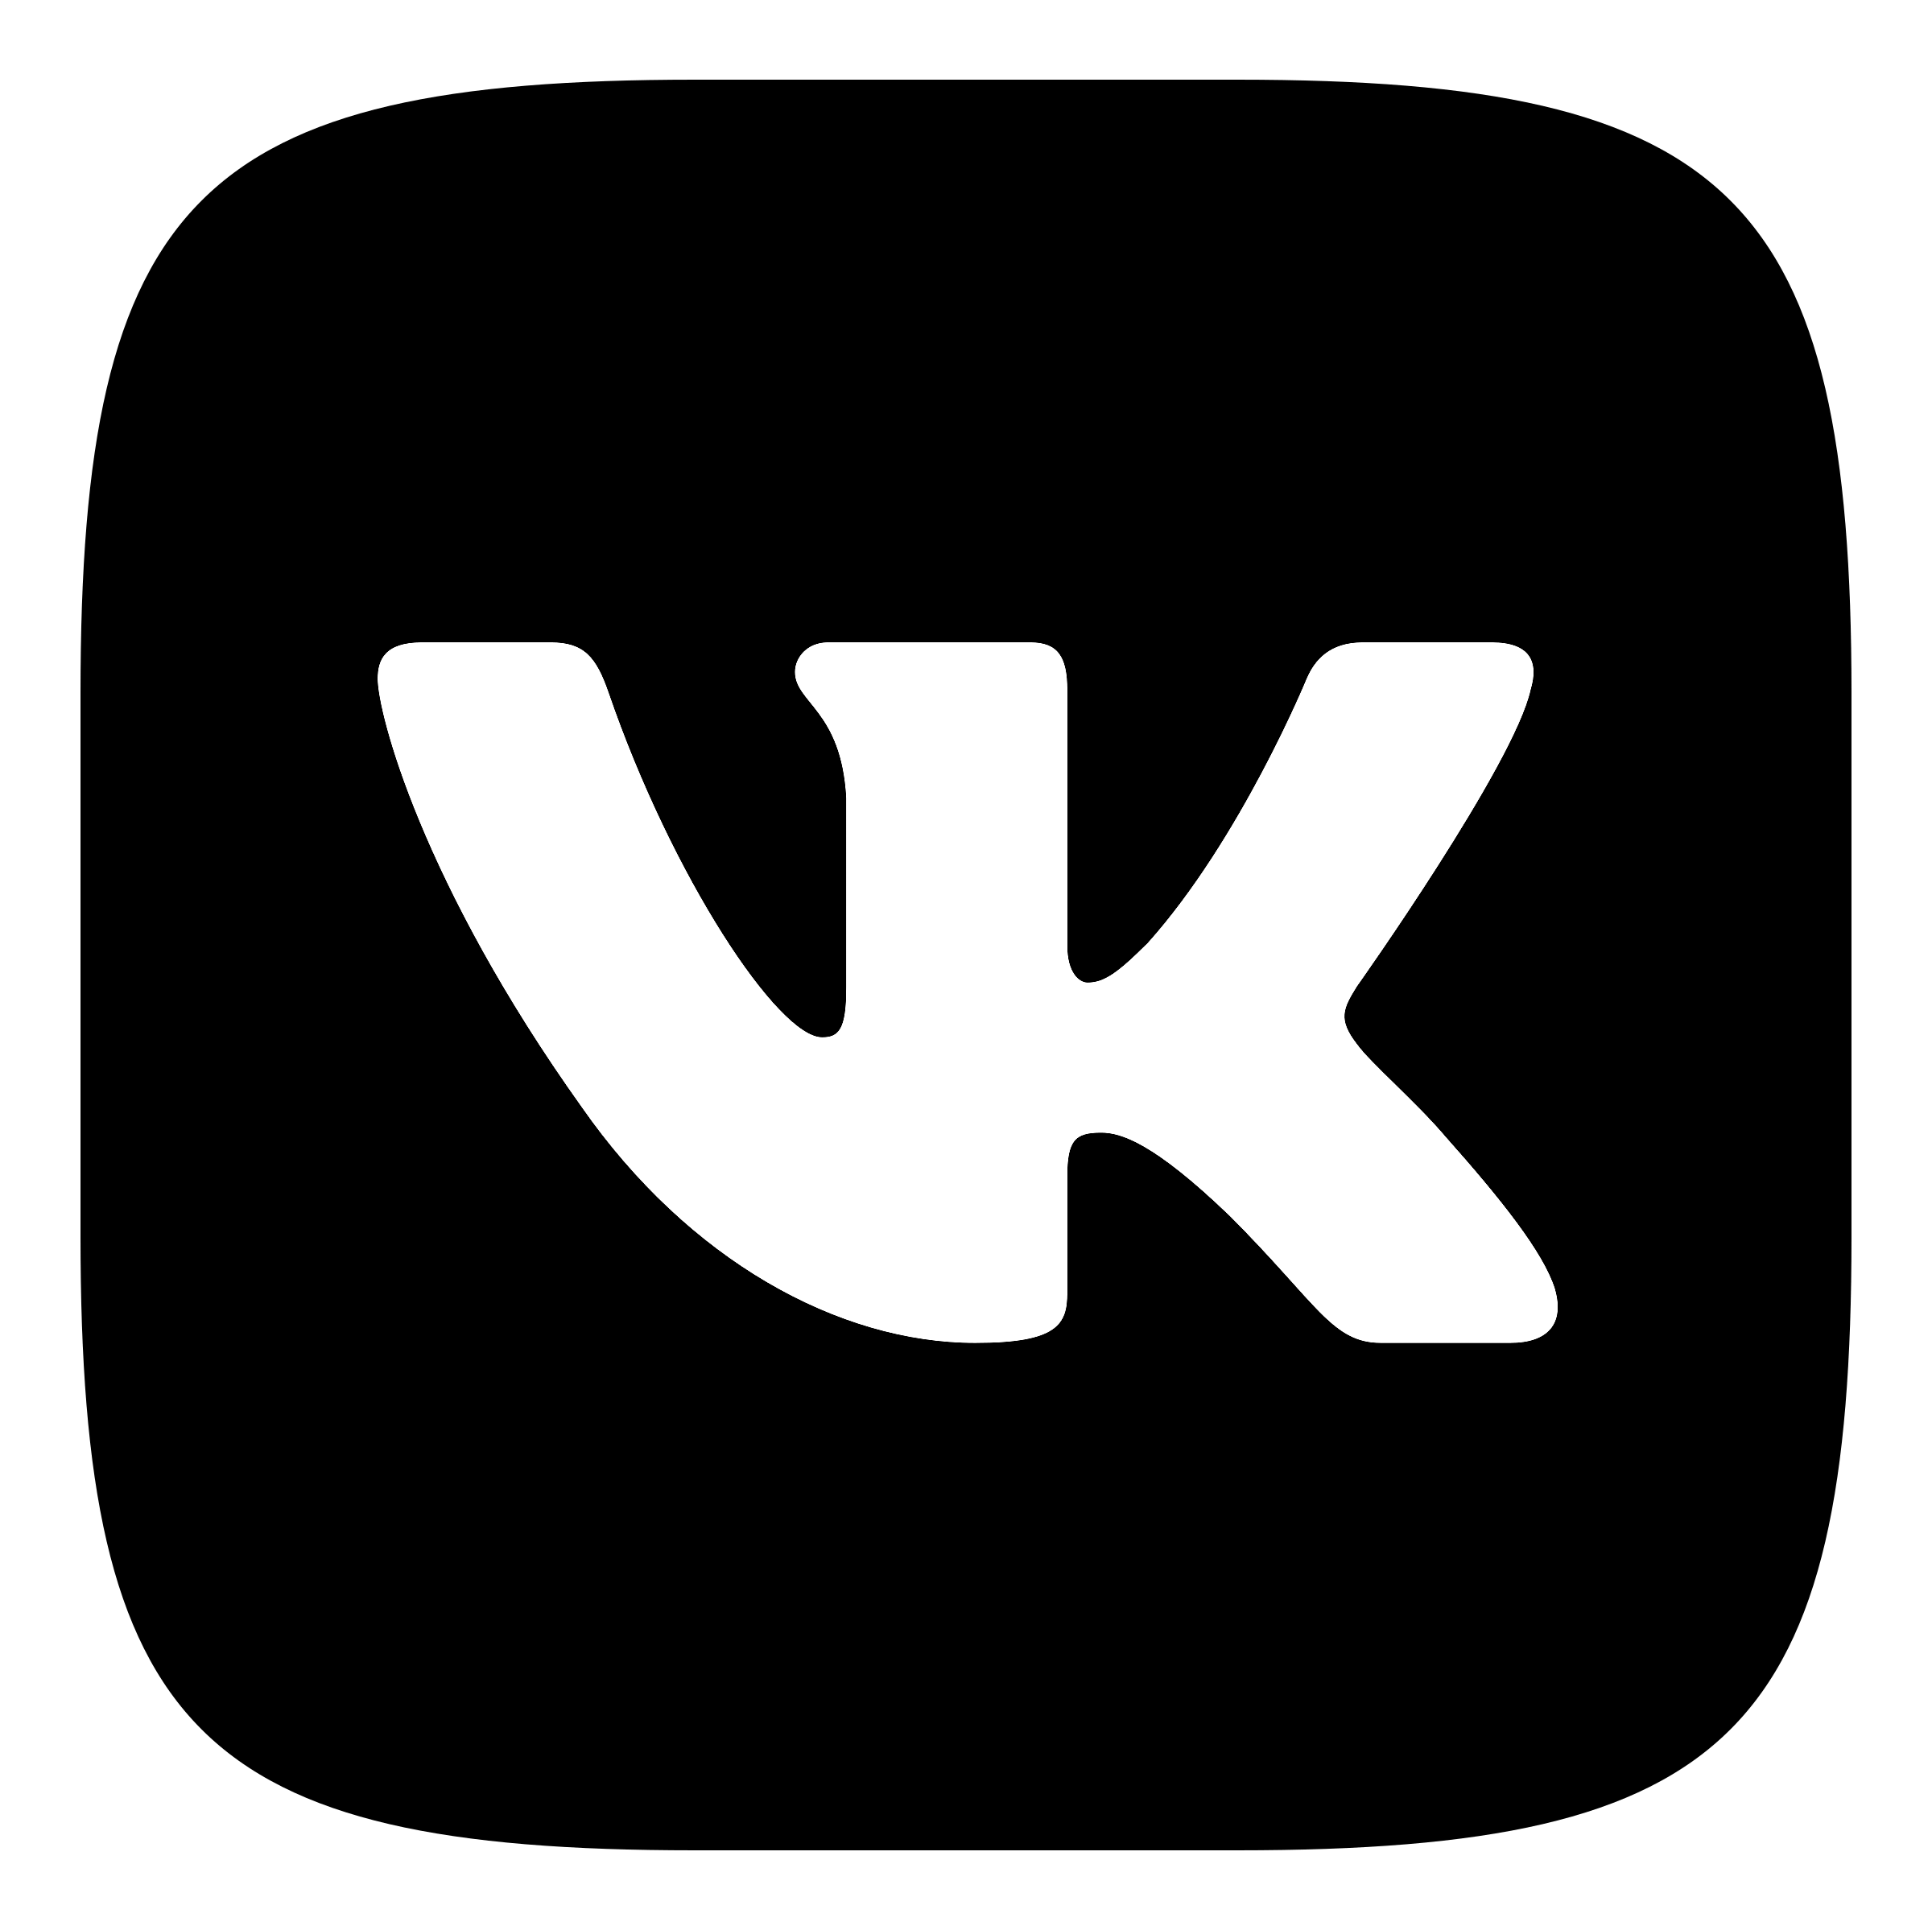 Vk projects